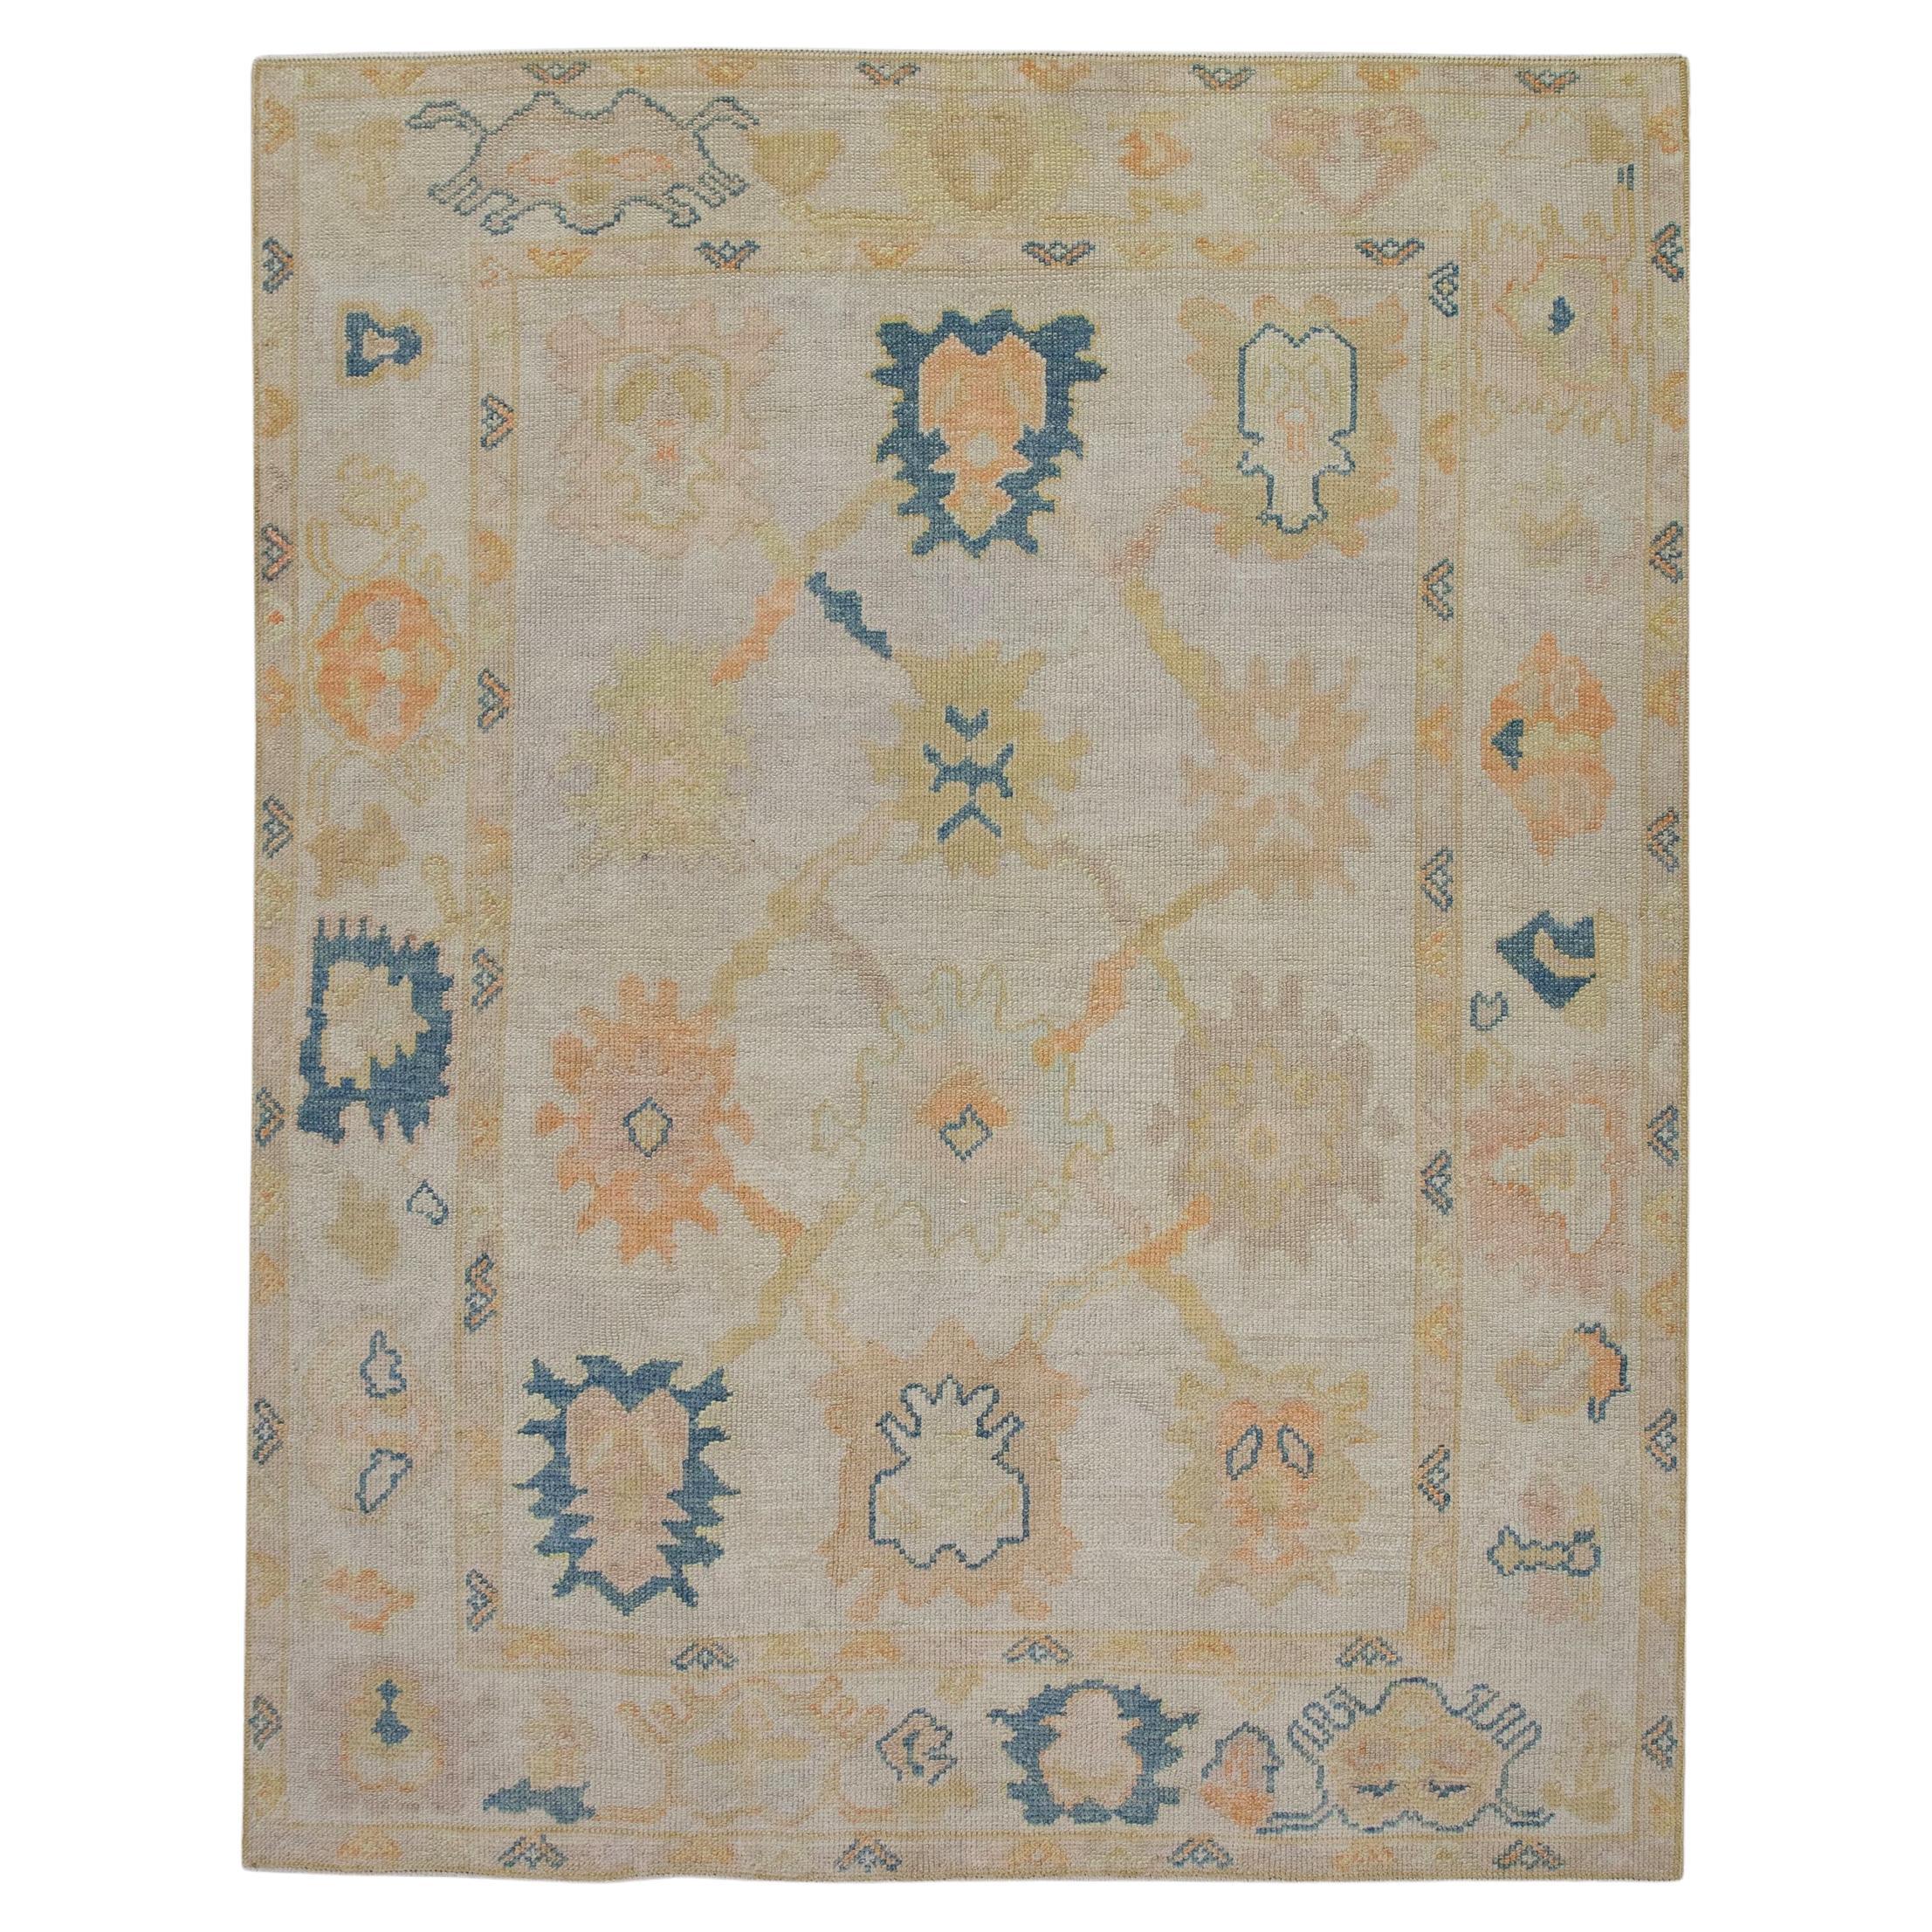 Colorful Floral Pattern Handwoven Wool Turkish Oushak Rug 5'1" x 6'5"